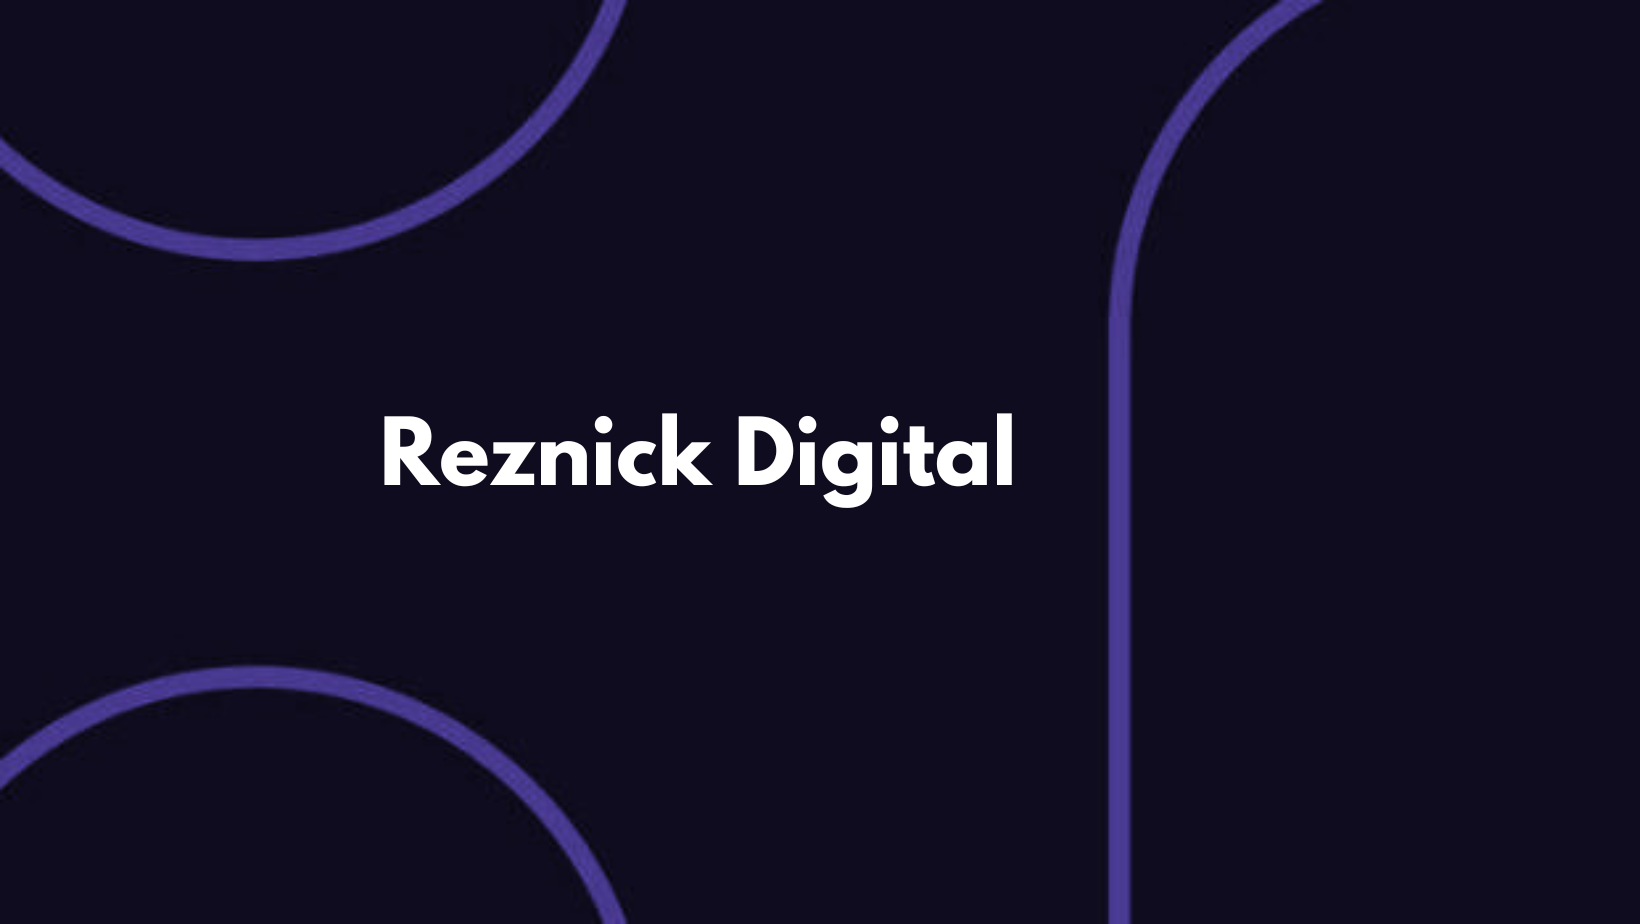 Frequency Announces Partnership with Reznick Digital